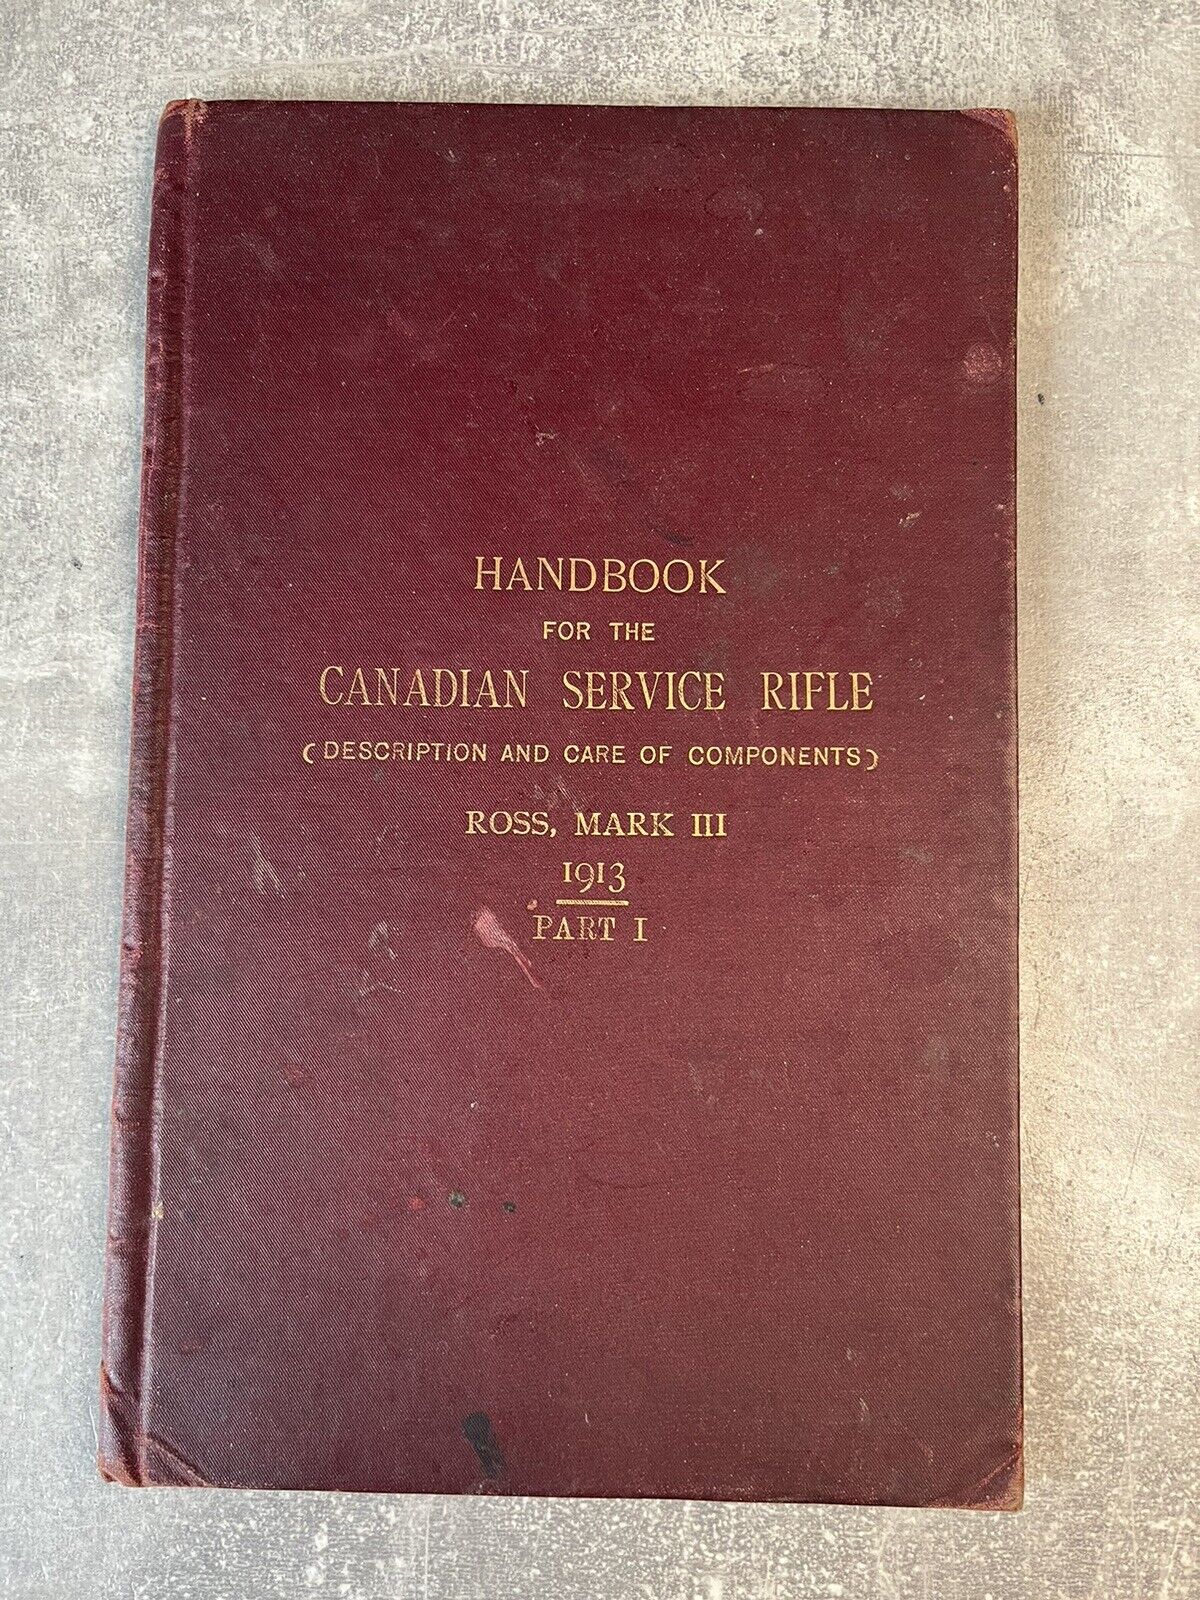 Handbook For The Canadian Service Rifle - Ross, Mark III - 1913 - Part I WWI HB